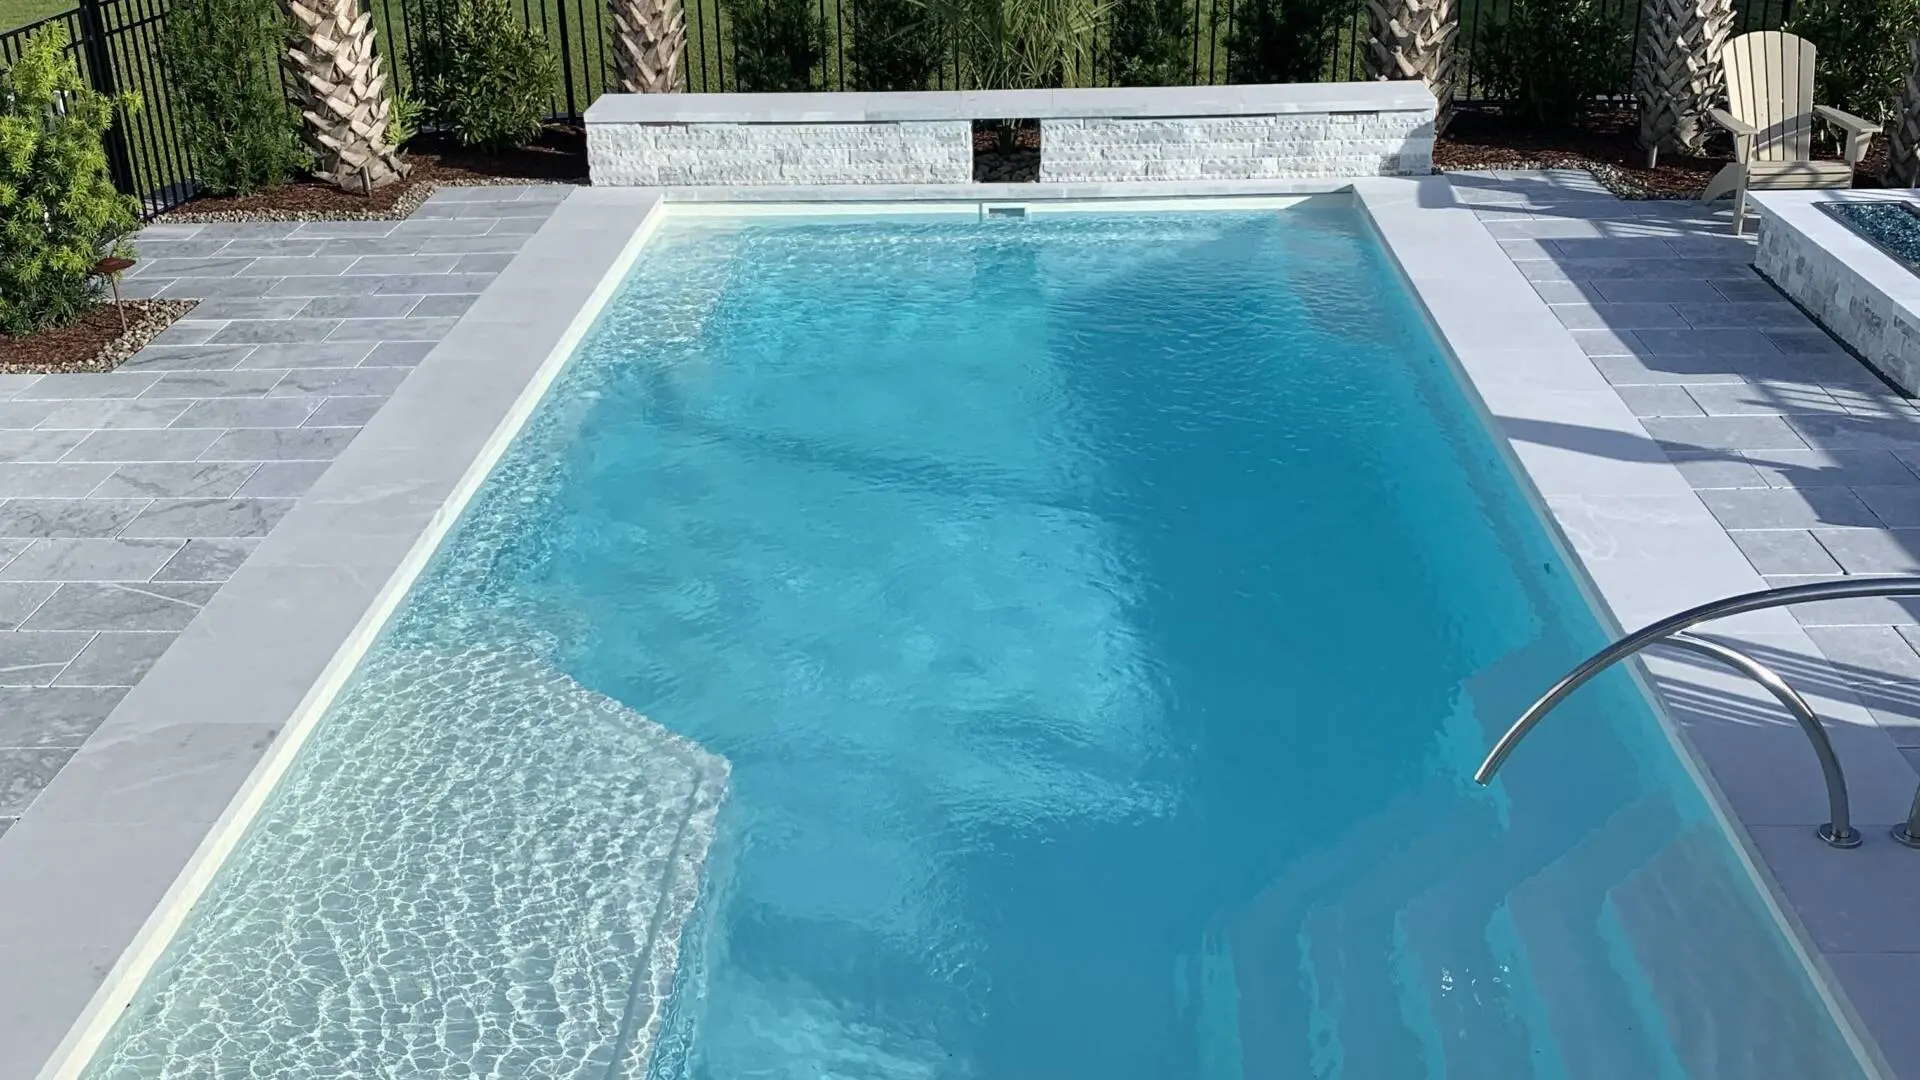 a newly installed fiberglass pool and landscaped patio area